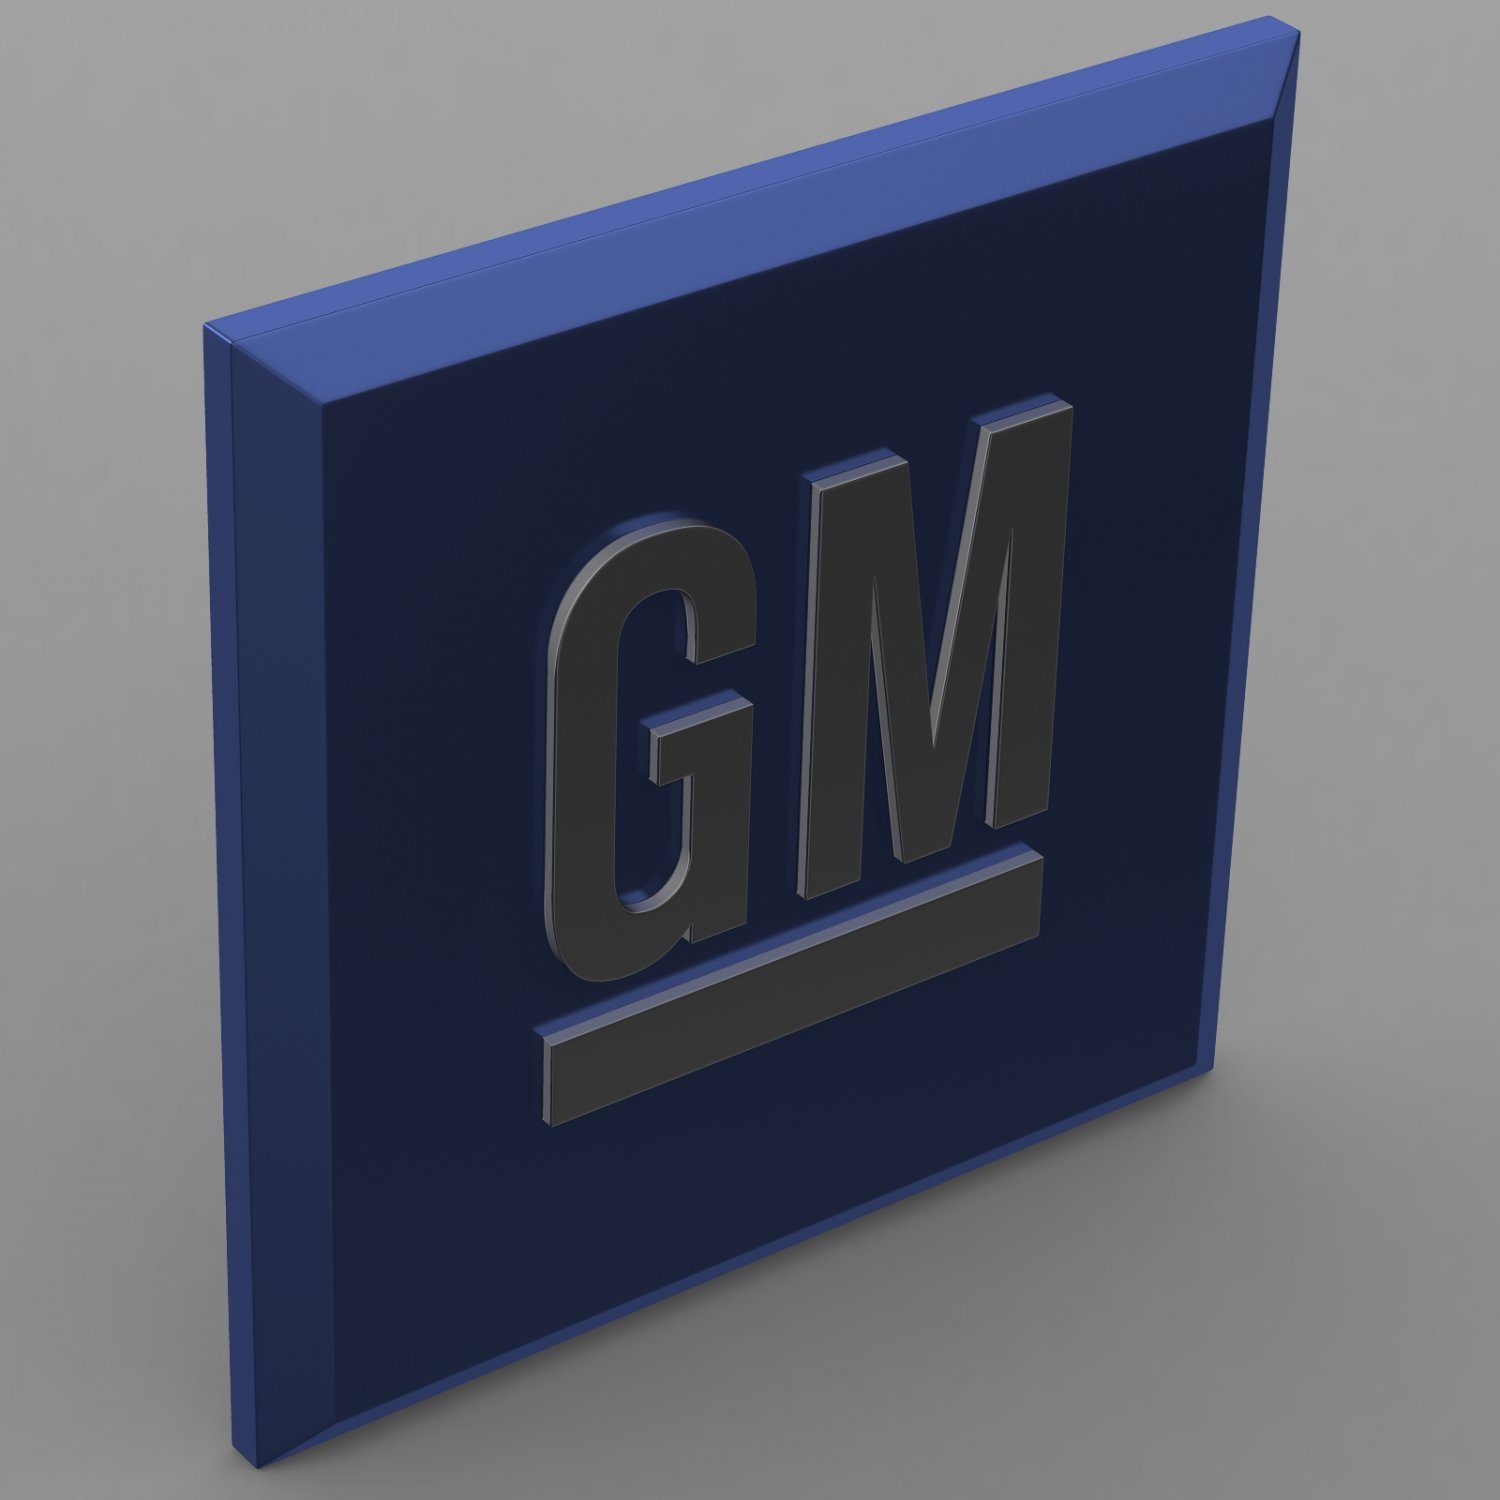 1,633 General Motors Logo Images, Stock Photos, 3D objects